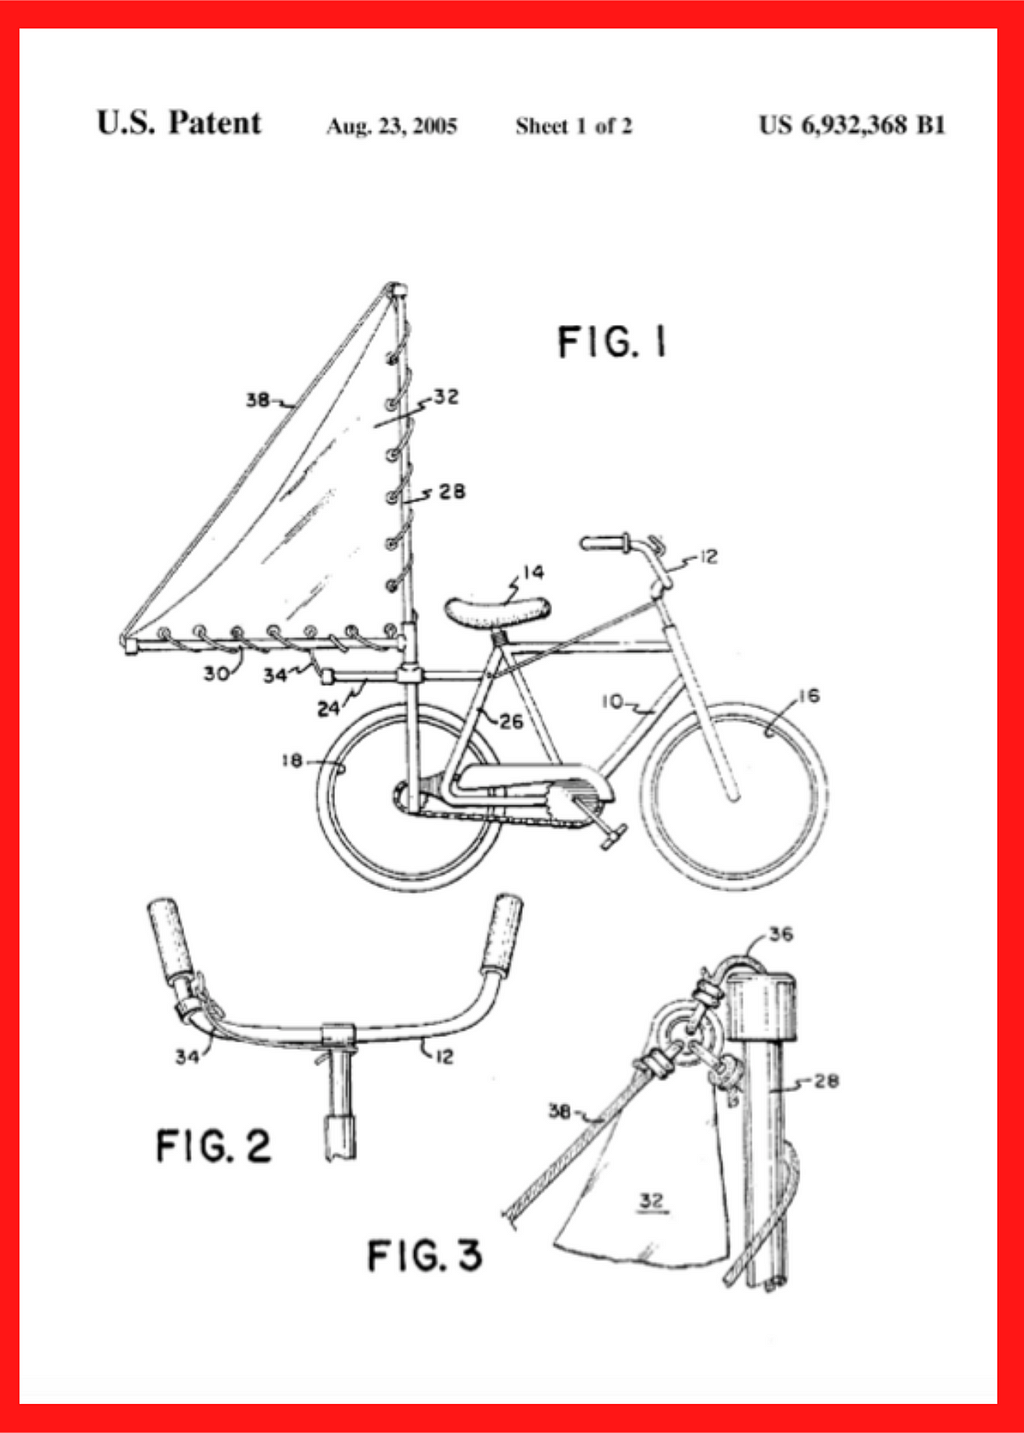 Patent for a wind-powered bicycle